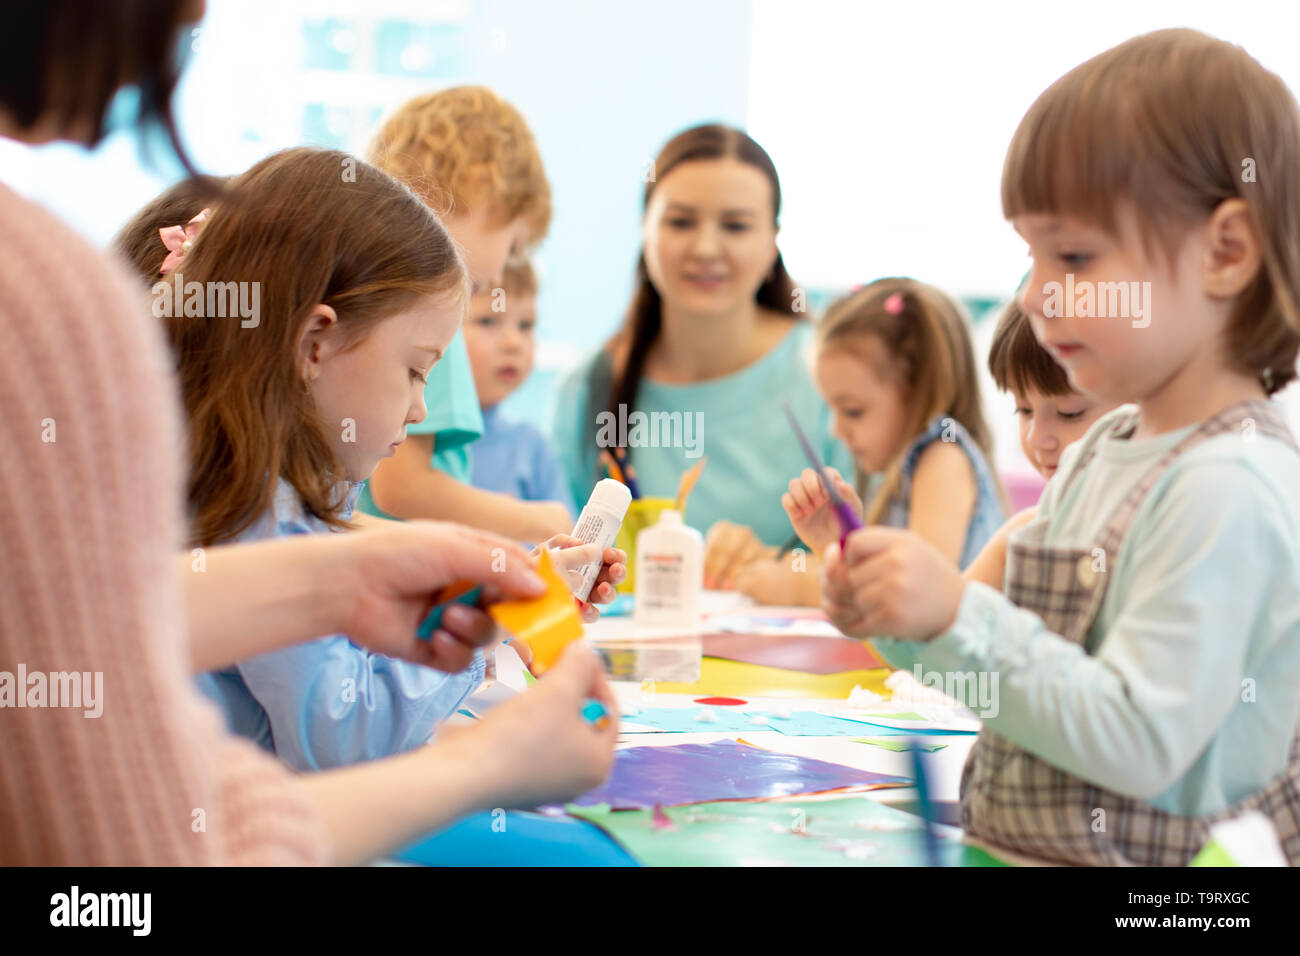 Development learning children in preschool. Children's project in kindergarten. Group of kids and teacher cutting paper and gluing with glue stick on art class in kindergarten or daycare Stock Photo